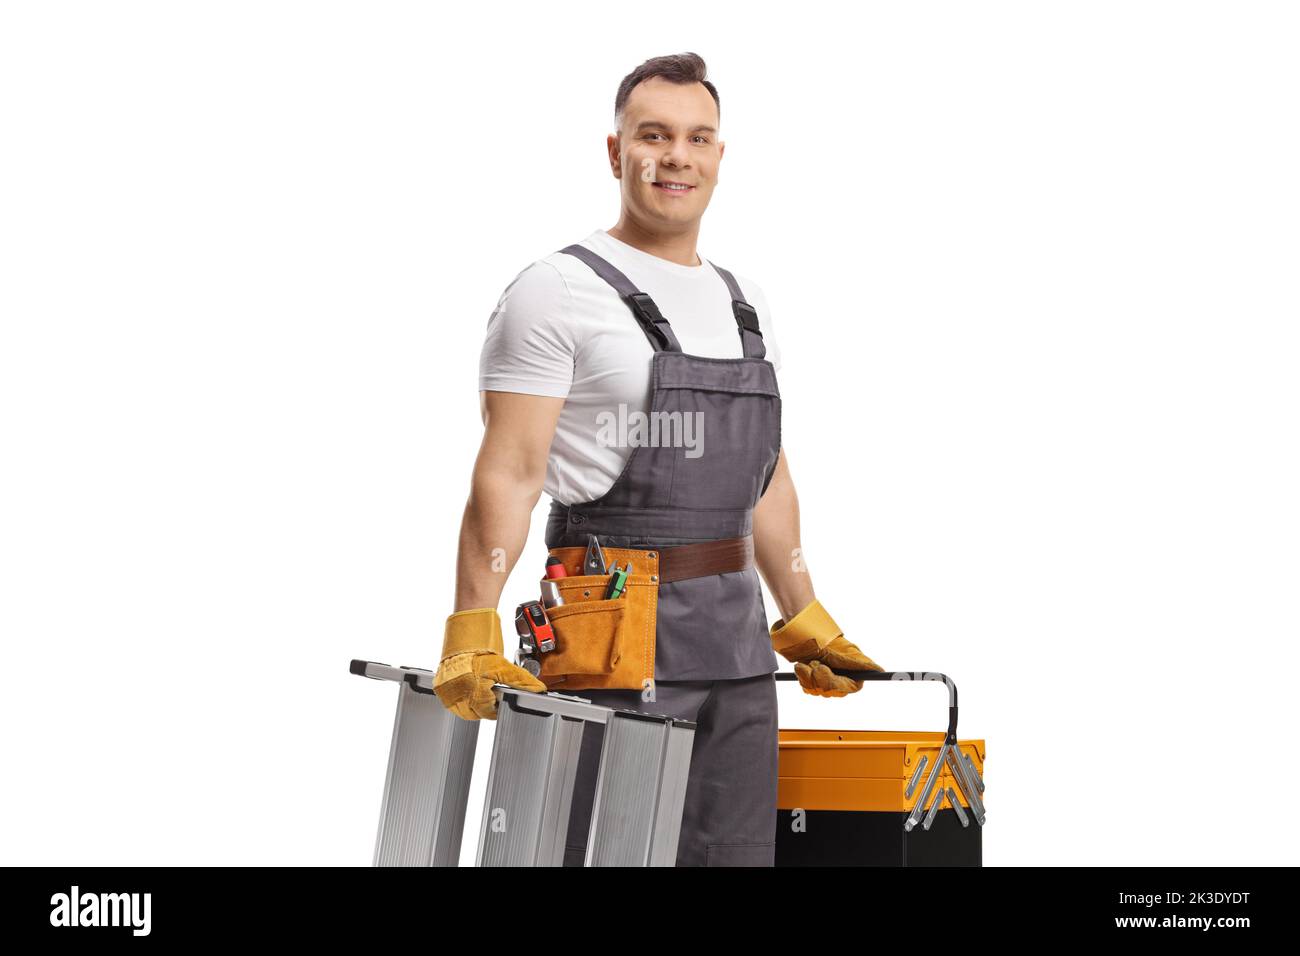 Repairman in a uniform carrying a ladder and a tool box isolated on white background Stock Photo